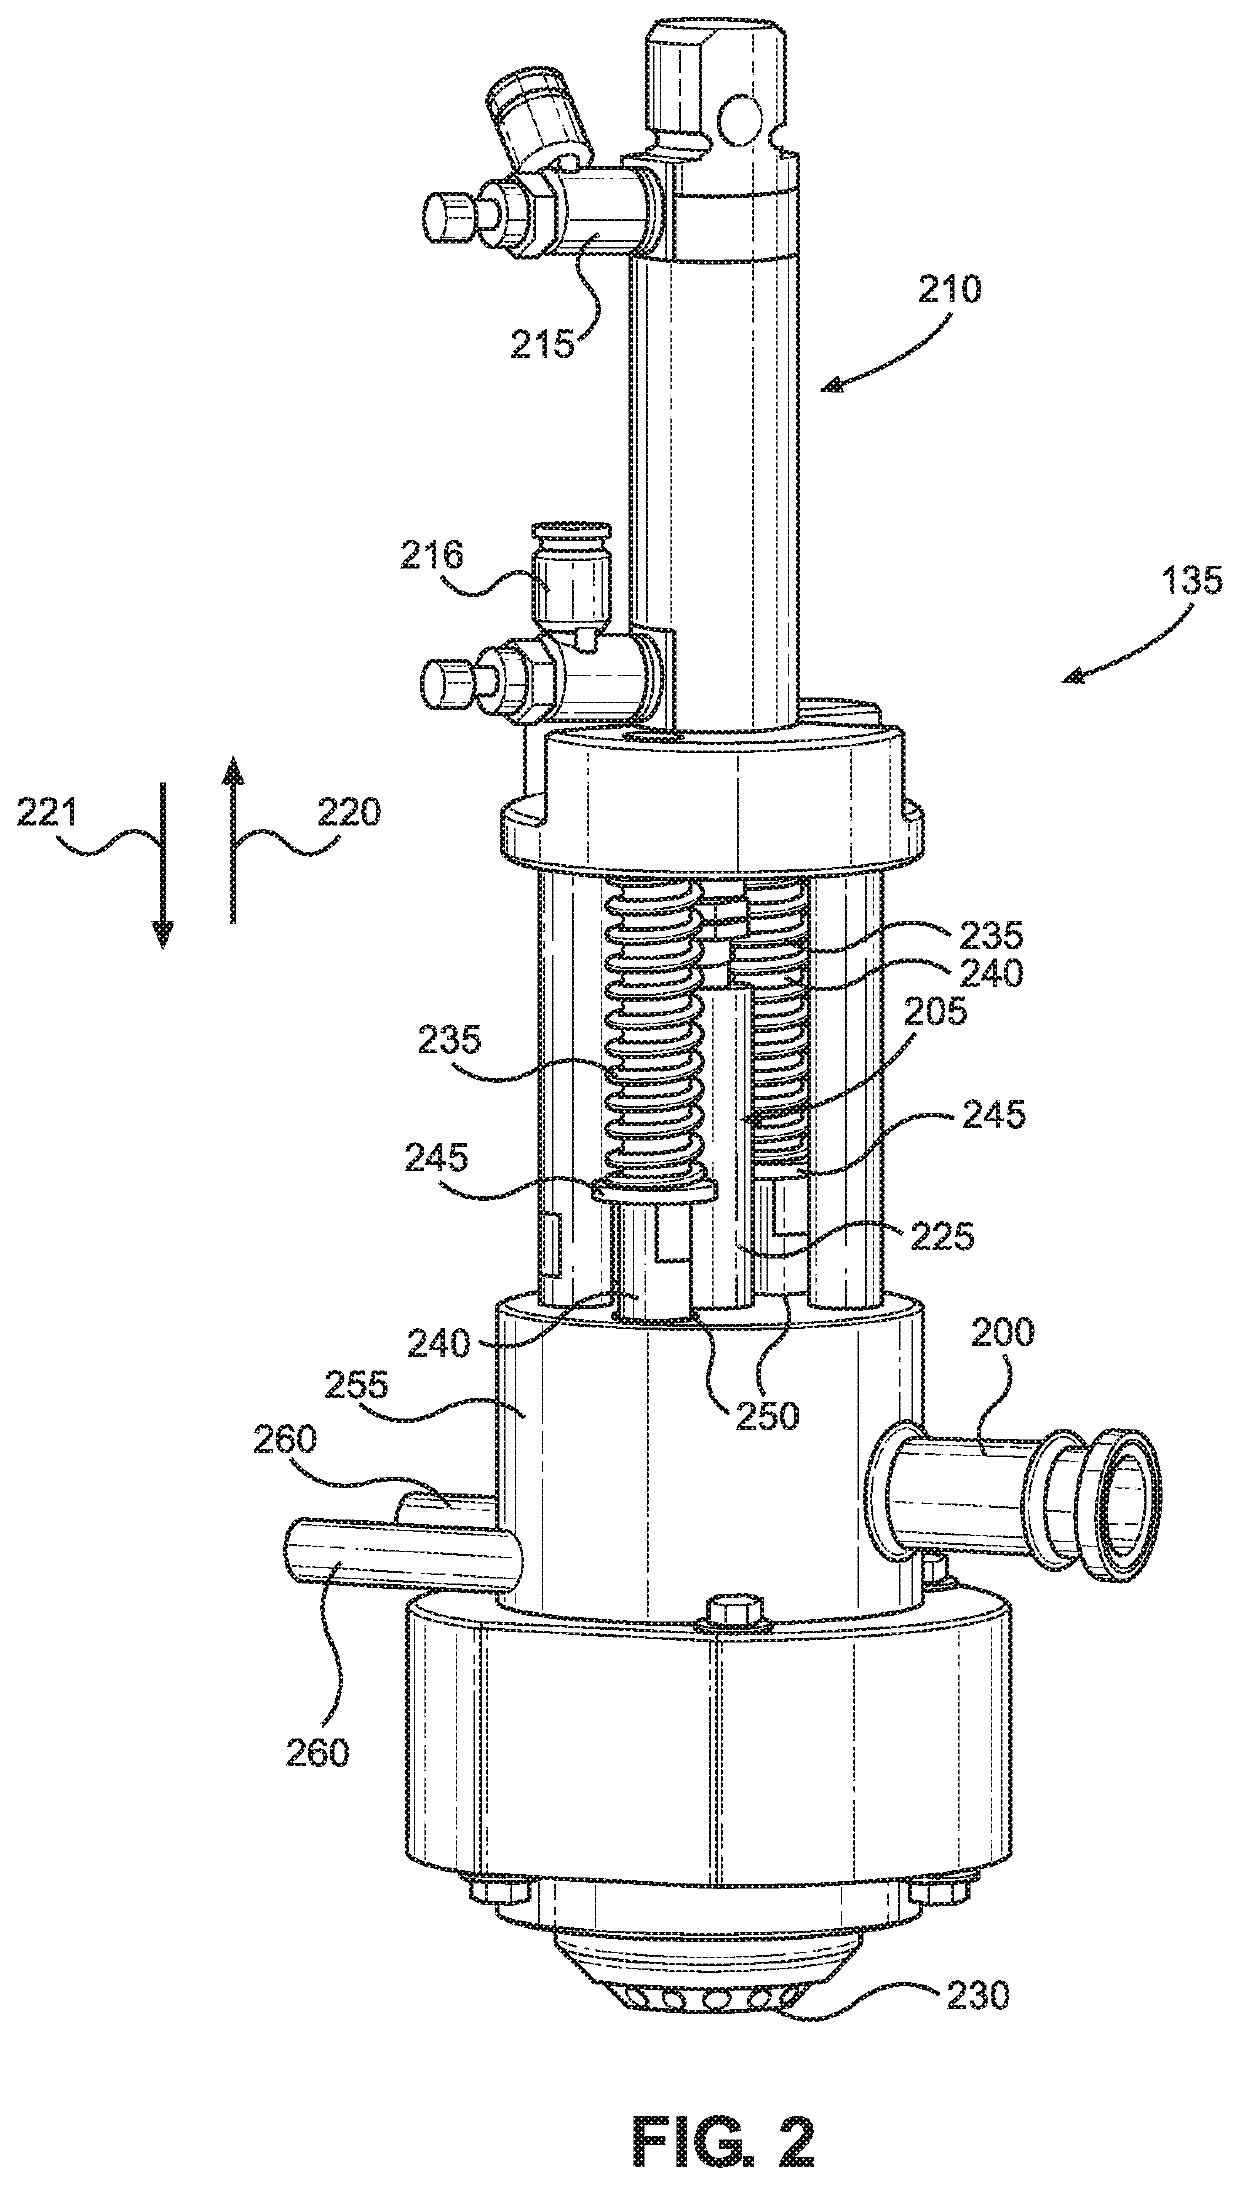 Apparatus and method for filling a container